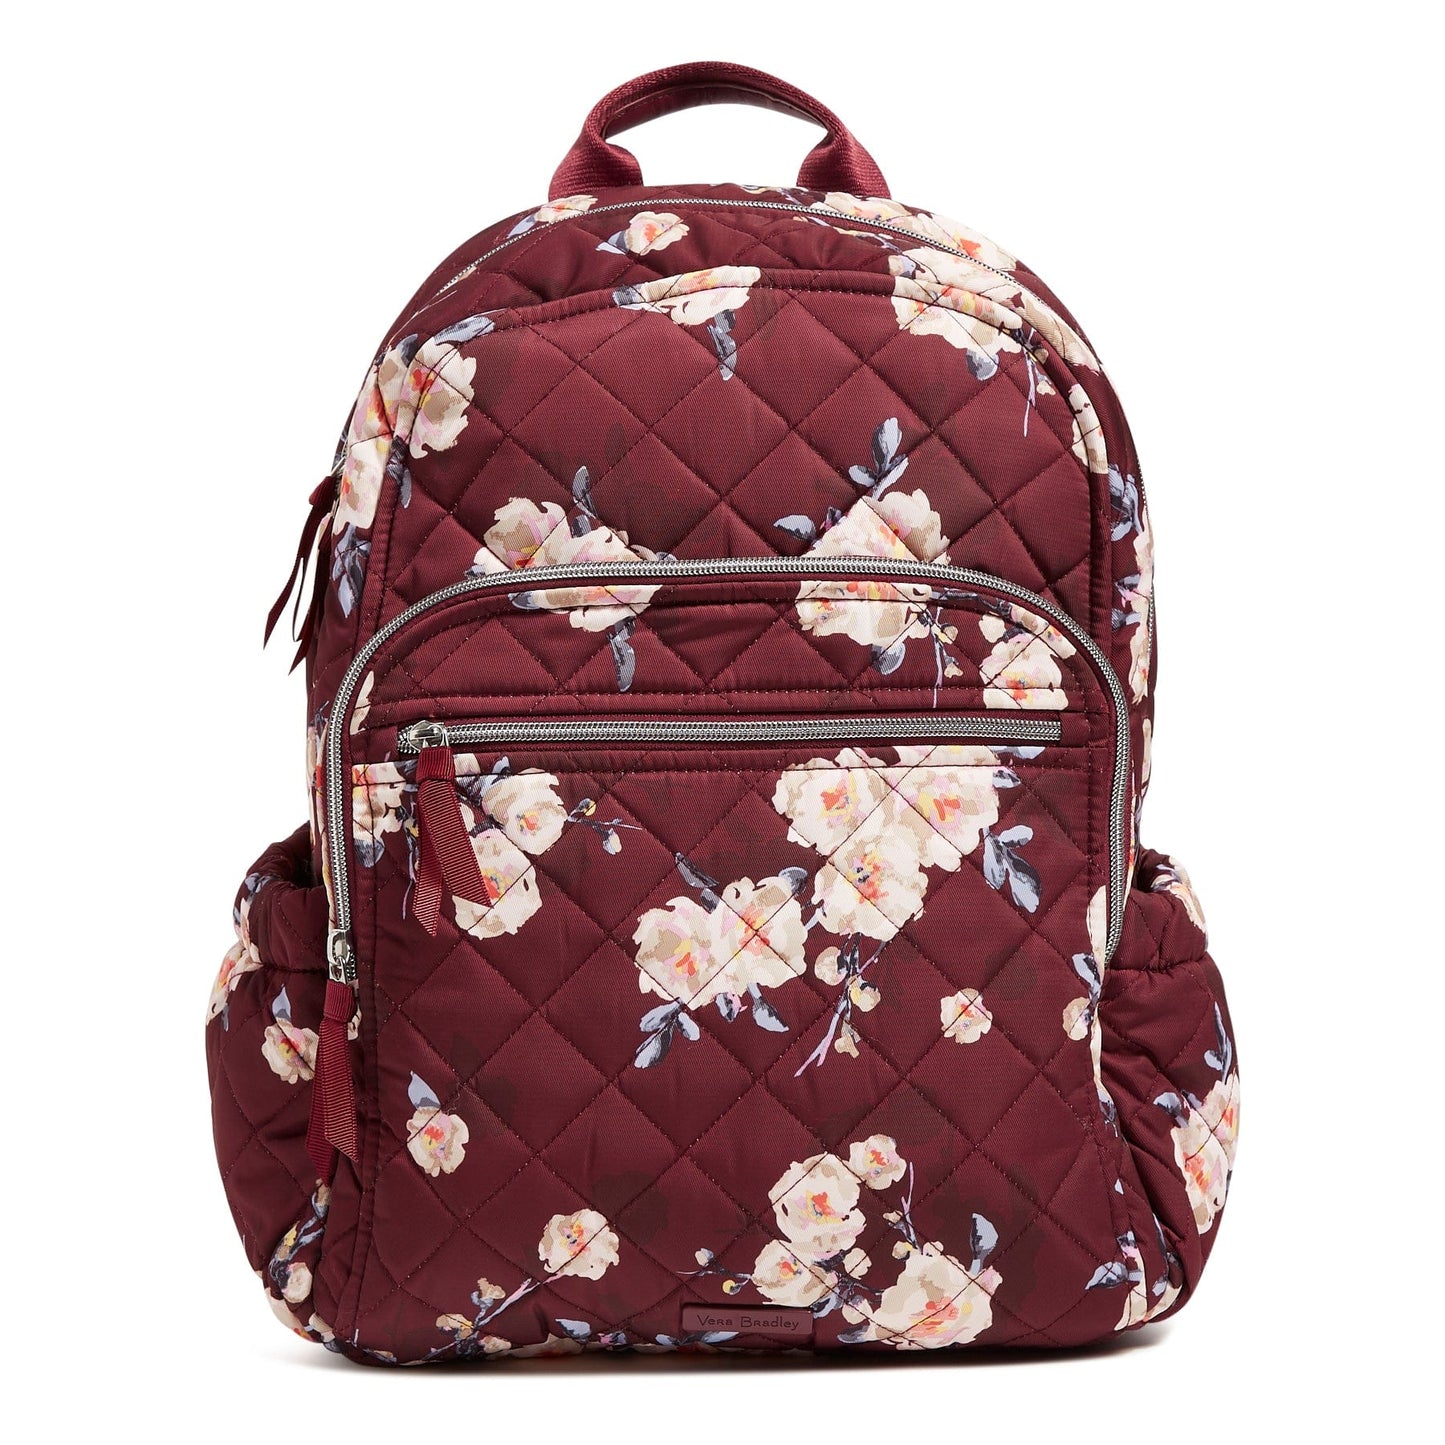 Campus Backpack-Blooms and Branches-Image 1-Vera Bradley